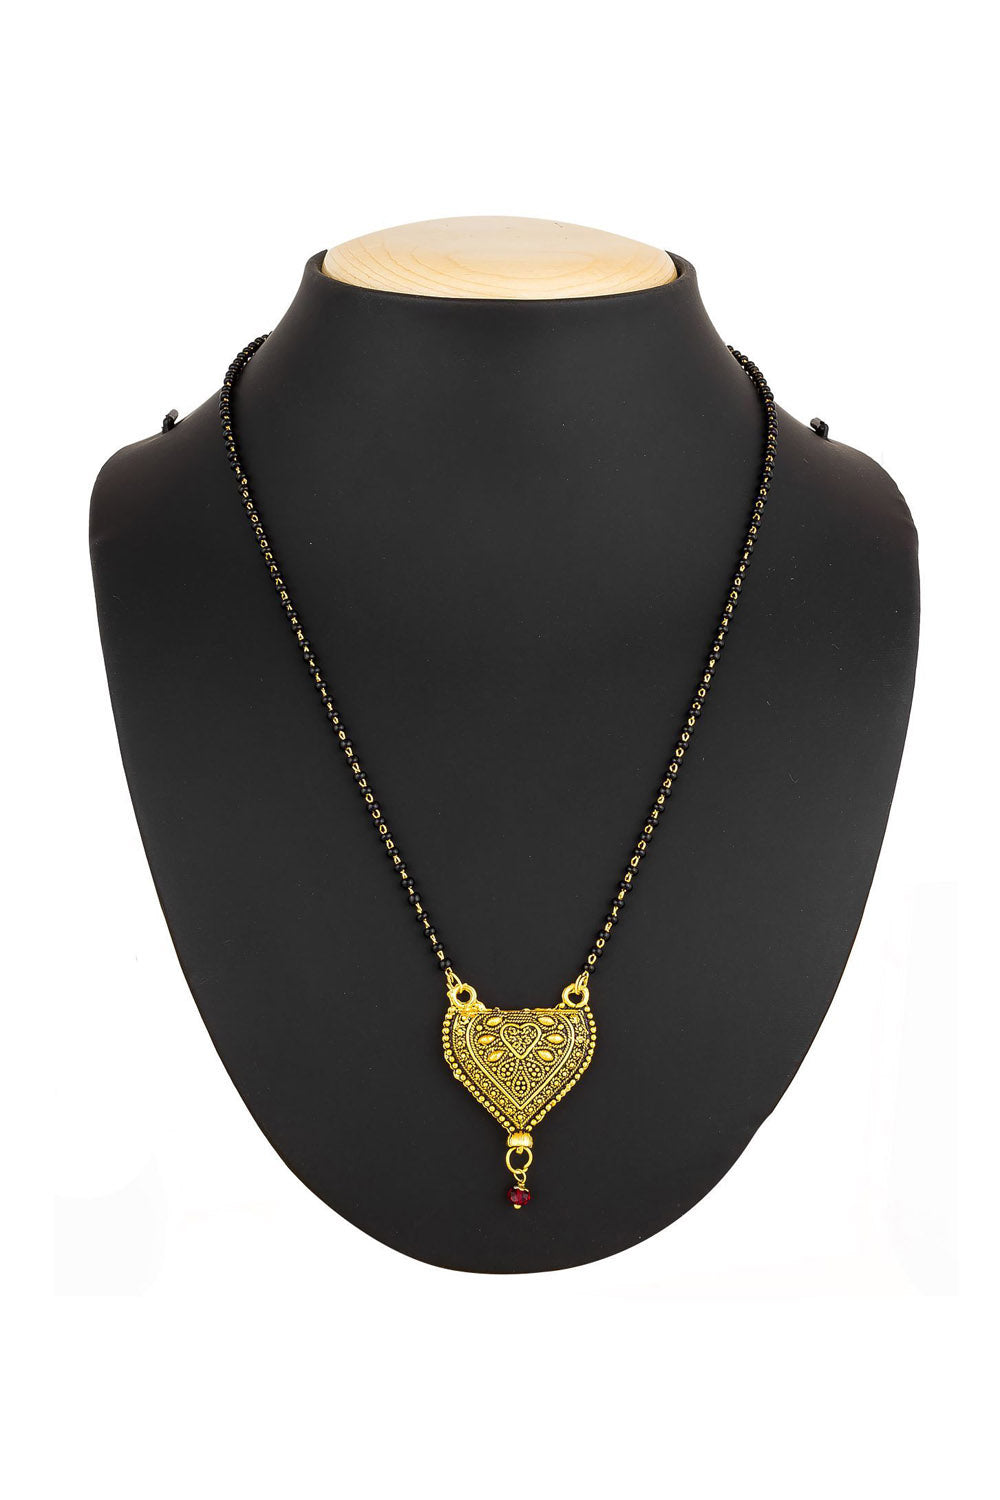 Women's Alloy Mangalsutra in Black and Golden